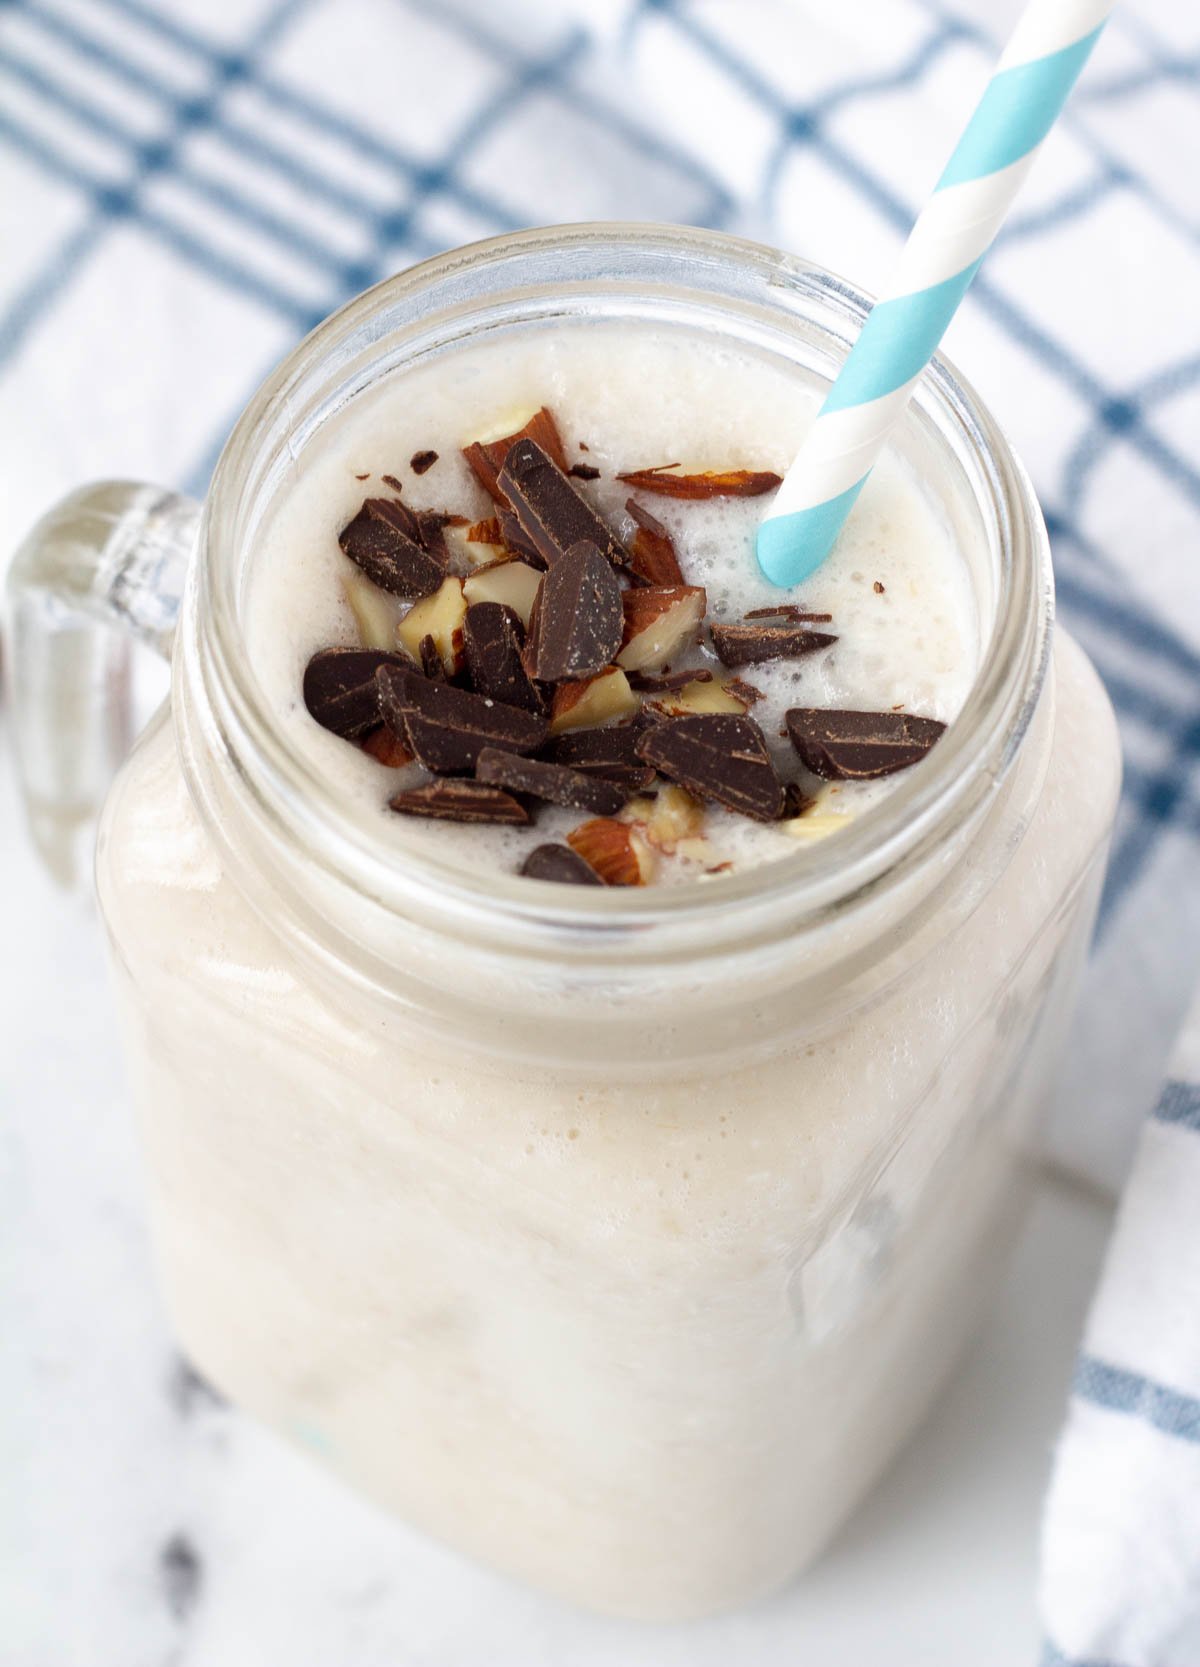 Coconut smoothie in glass mug, with blue striped straw and topped with chocolate shavings and almonds.